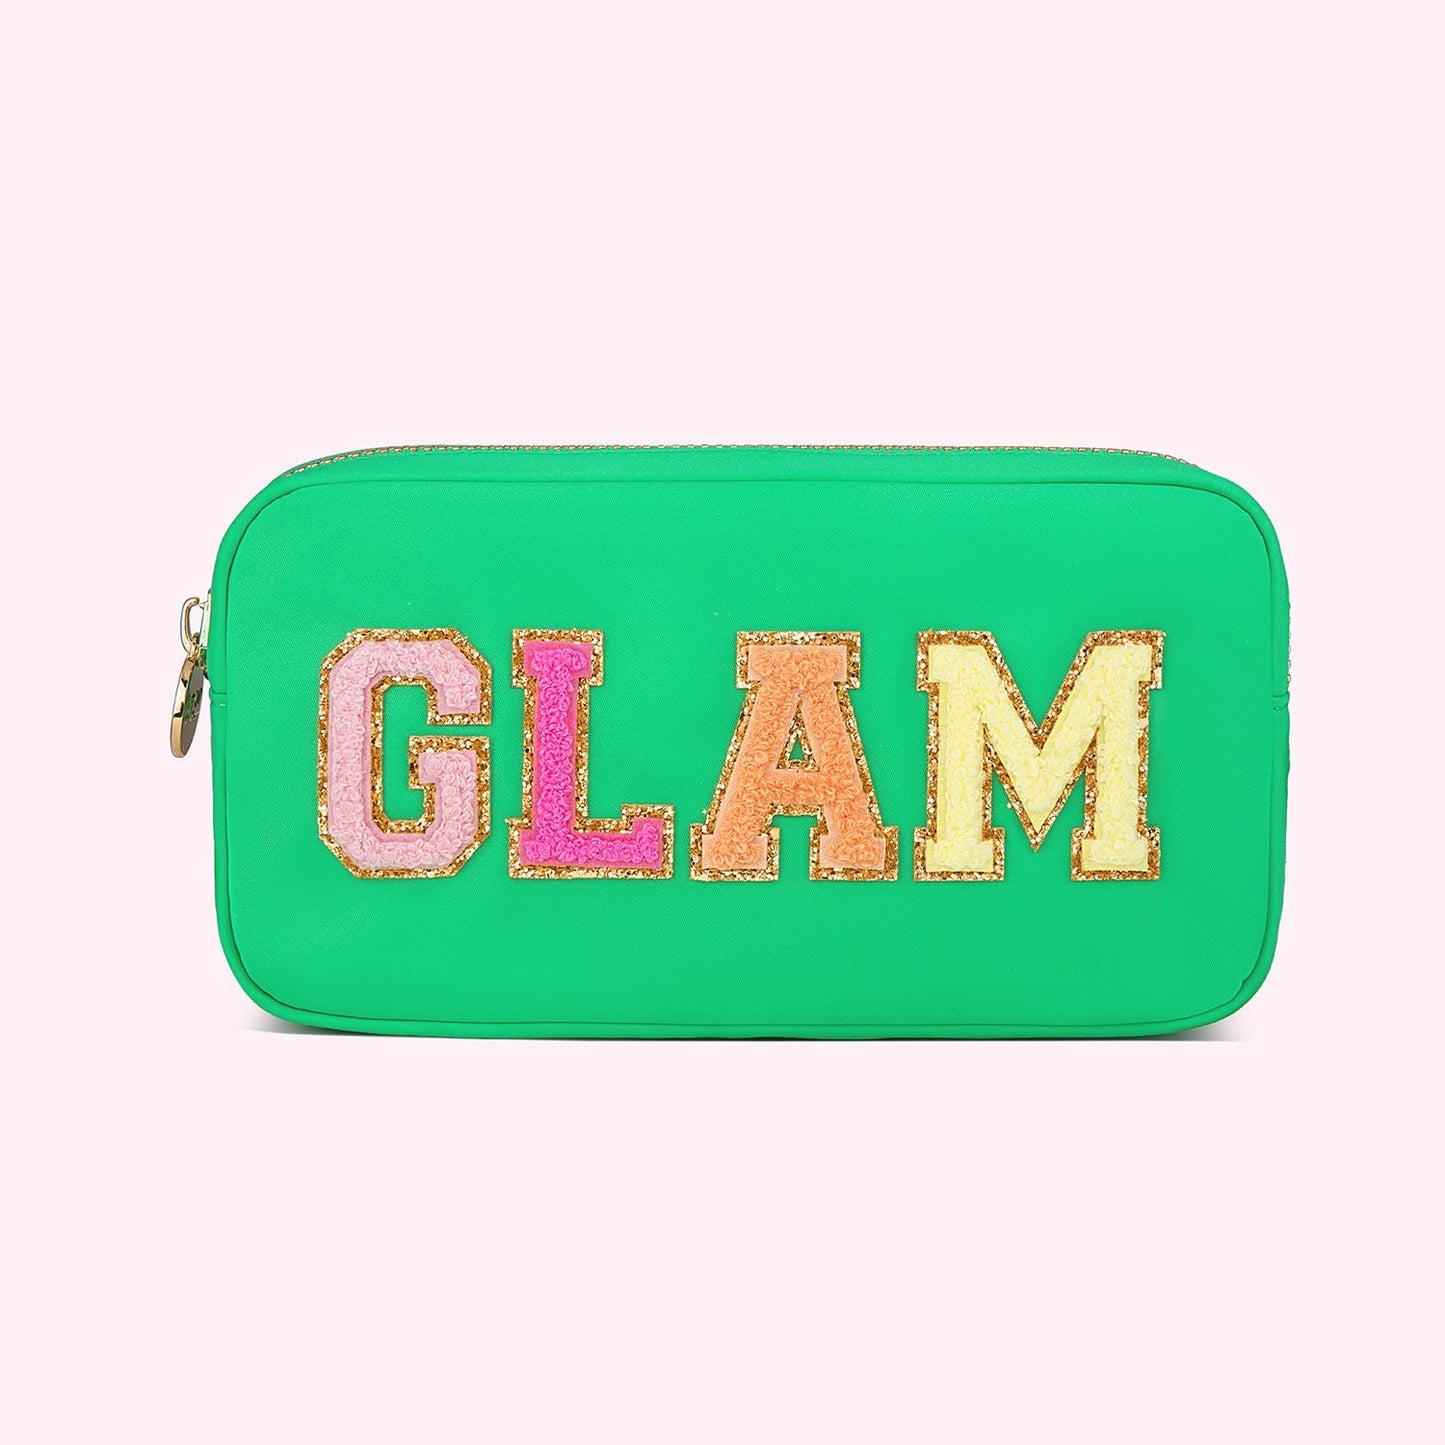 "Glam" Small Pouch